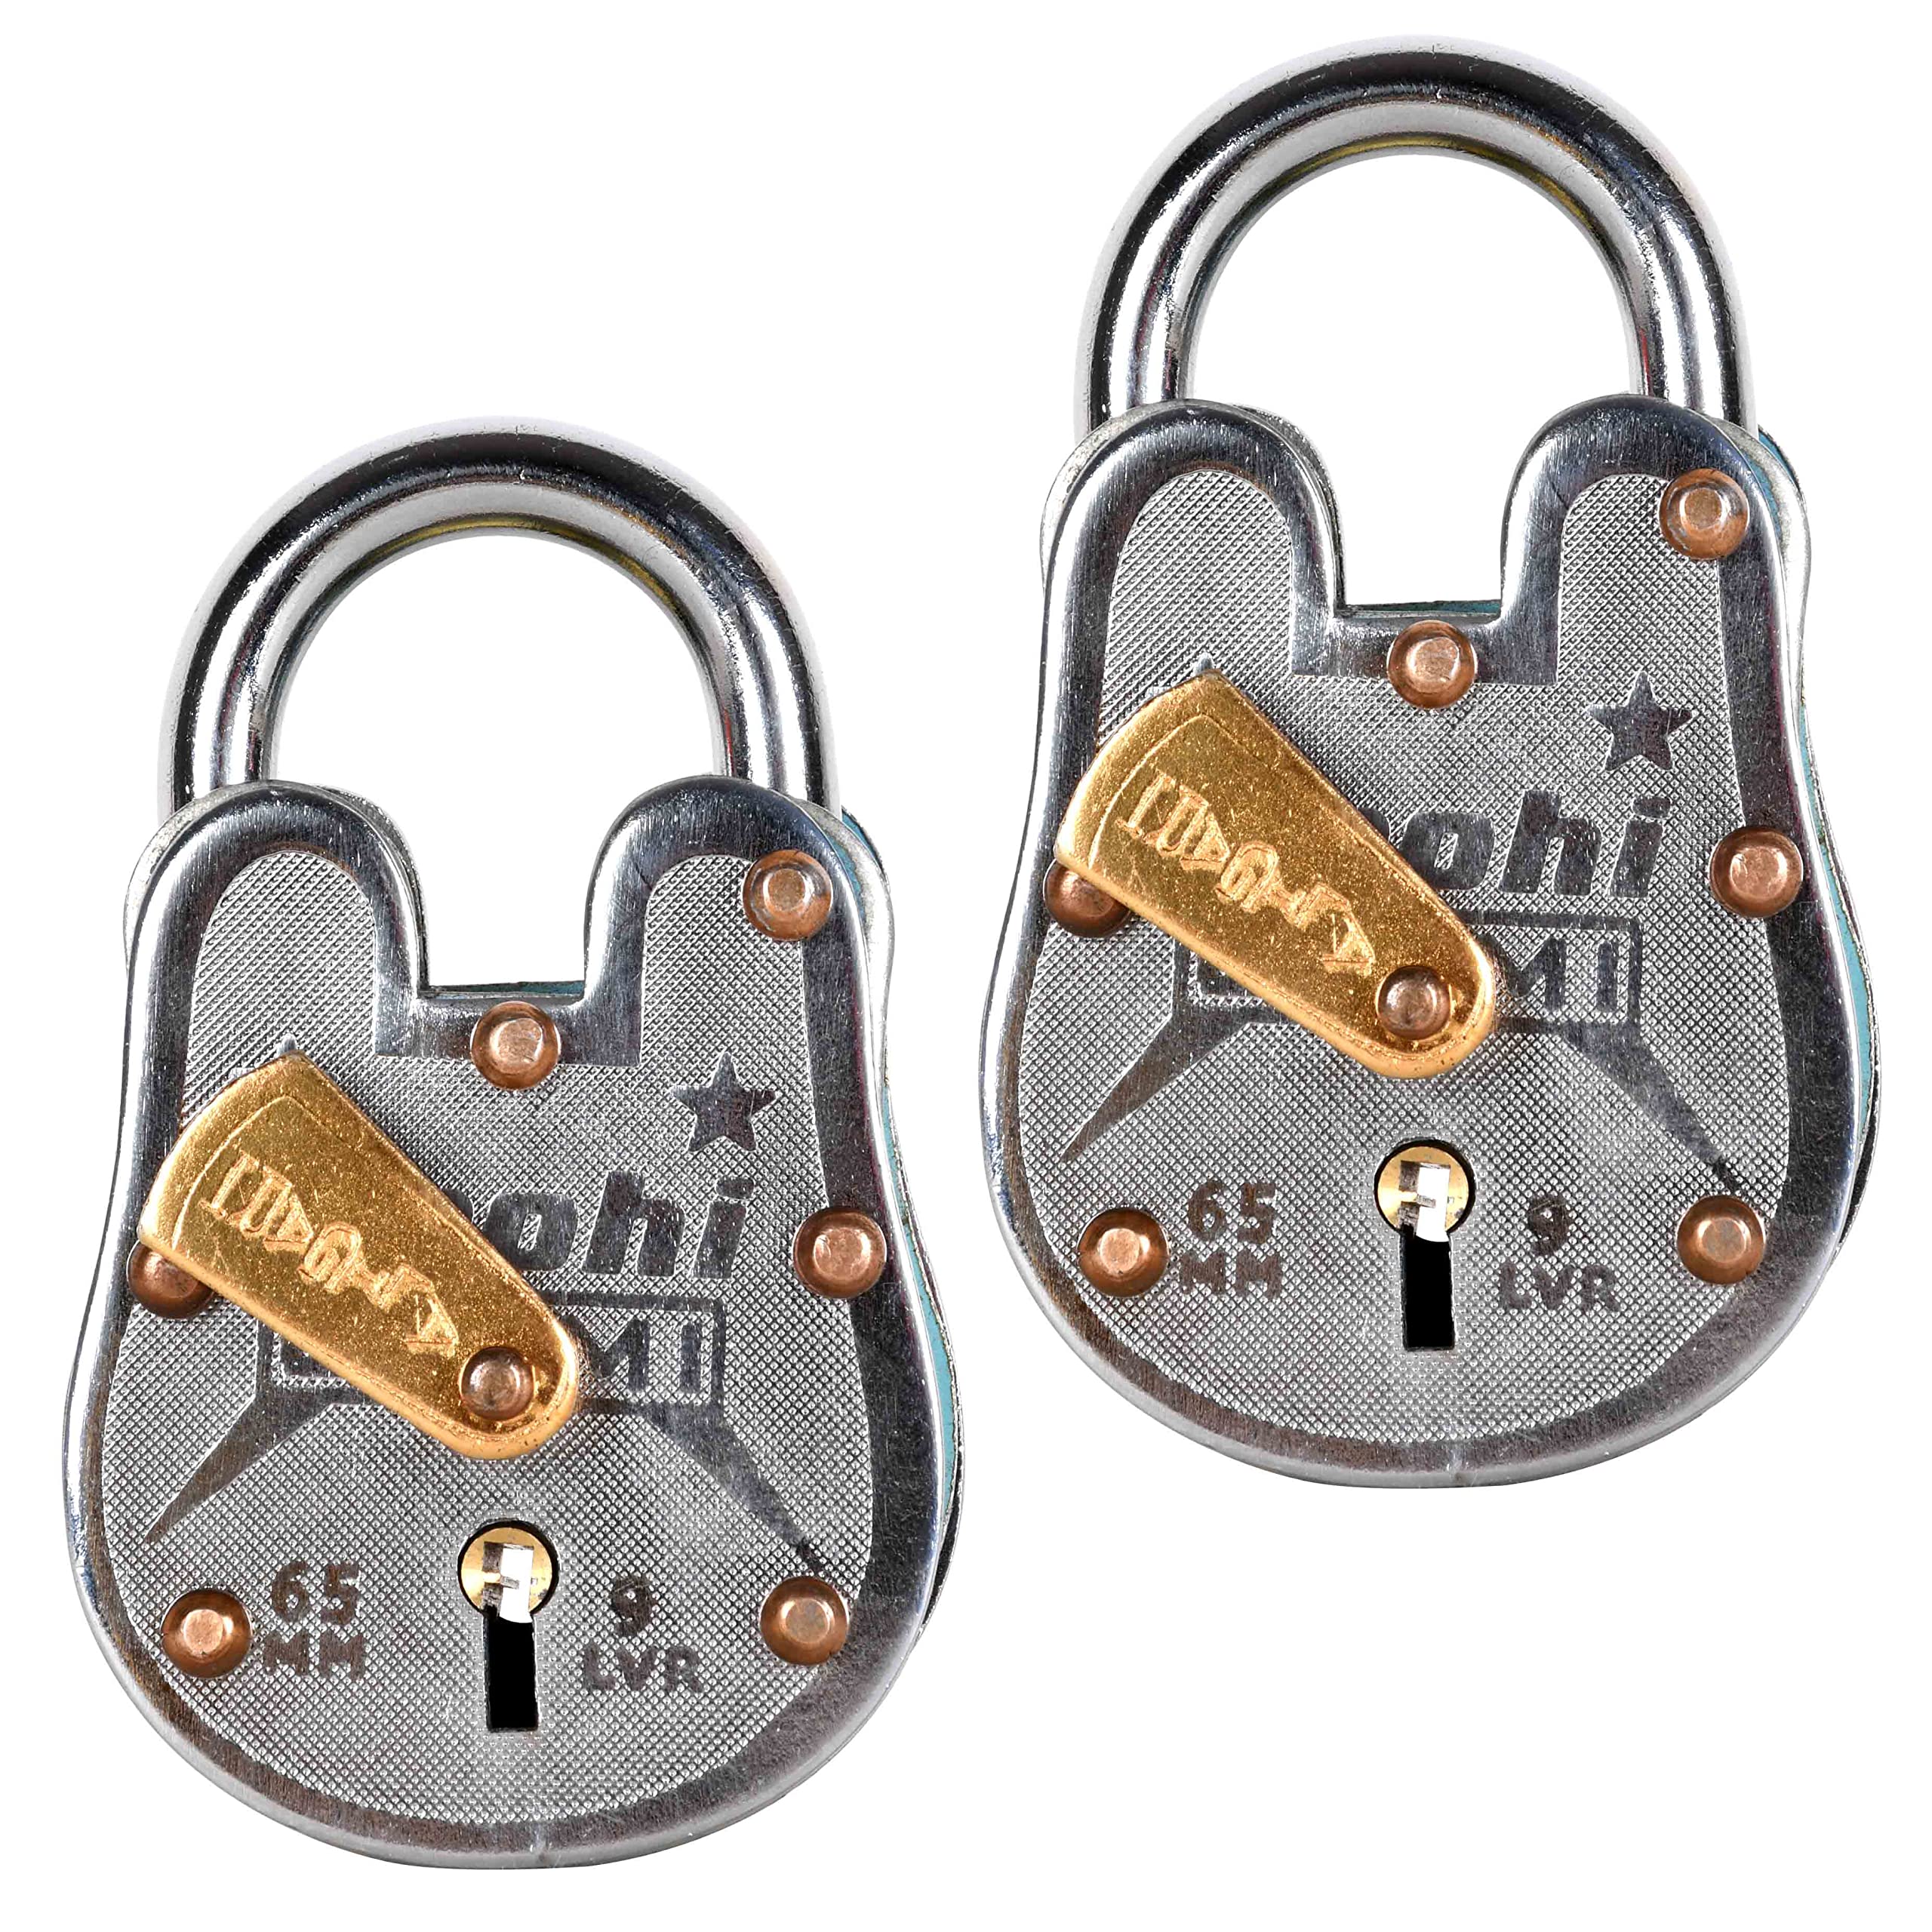 ROUND METAL Stainless Steel Antique Padlock Roohi (9 Levers 65mm Set Of 2) 9 Levers 65mm Double Locking & Key Imported Lock I Suitable Brass Antique Finish I Hudka Indor Lock And Men Door Lock Can Be Opareted Metal Locker I Entique Lock I Safty locker I D